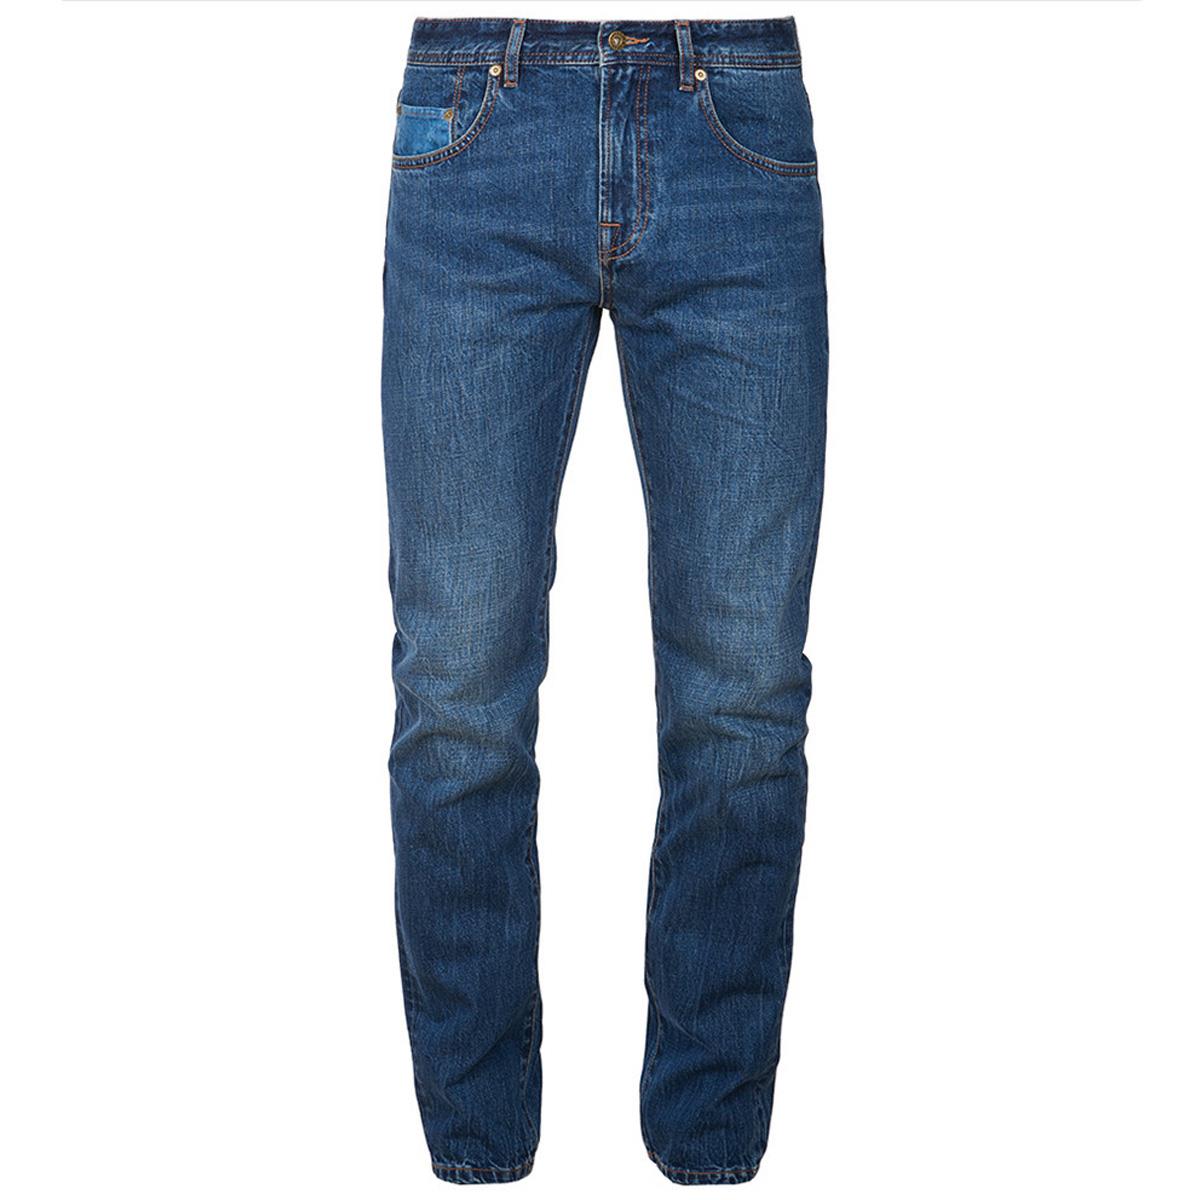 Barbour Mens Regular Fit Jeans Questions & Answers